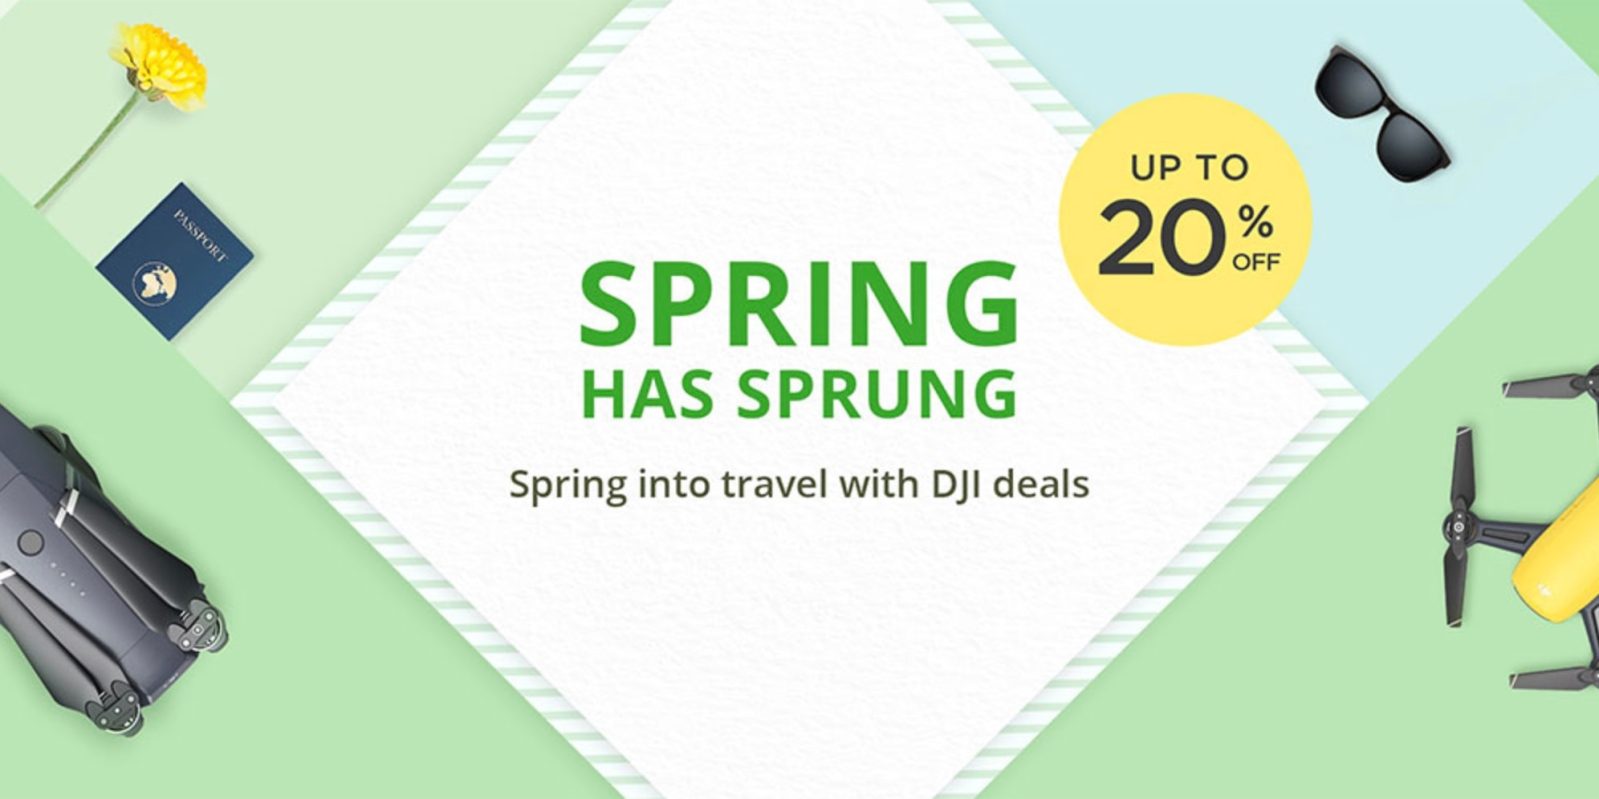 DJI launches spring event with discounts up to 20% off